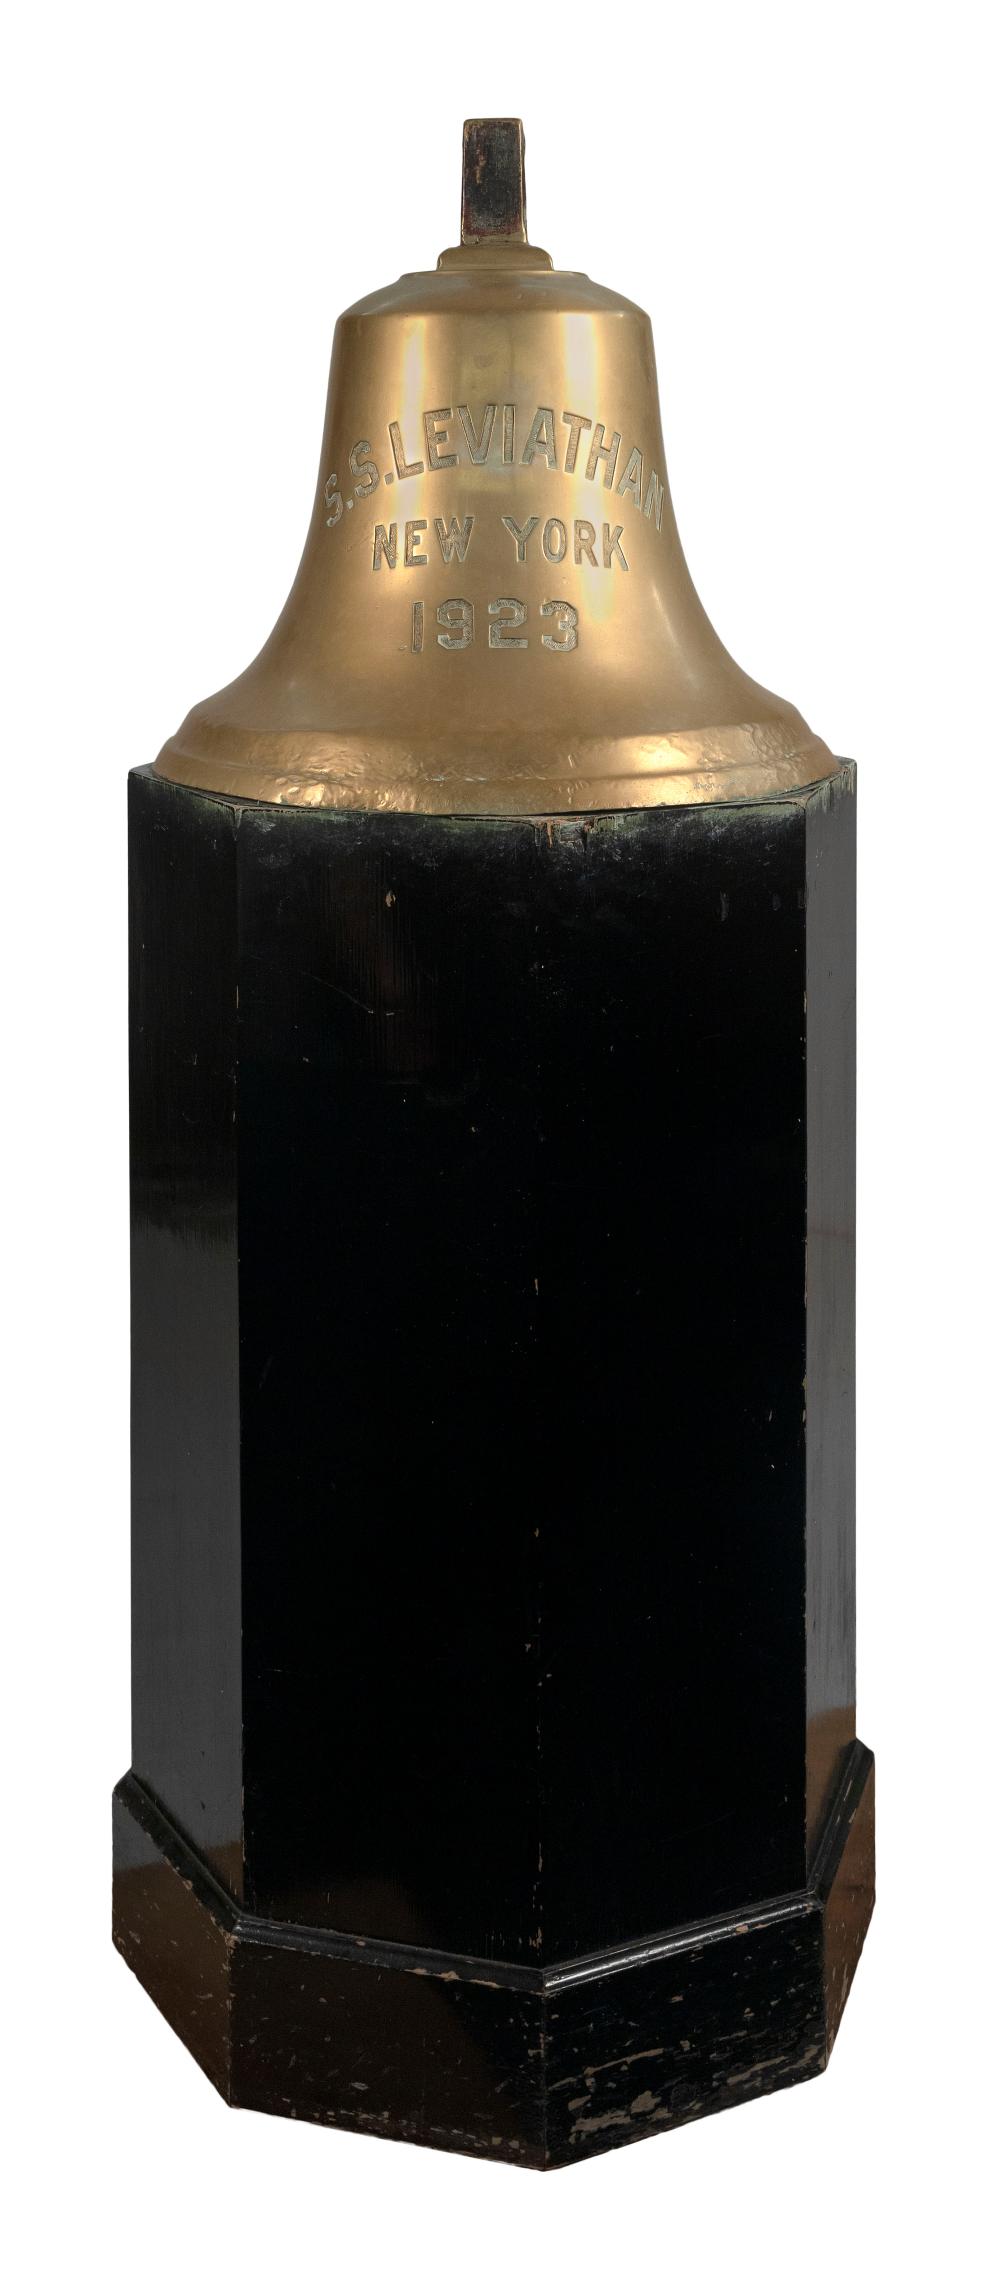 BRONZE BELL FROM THE S.S. LEVIATHAN